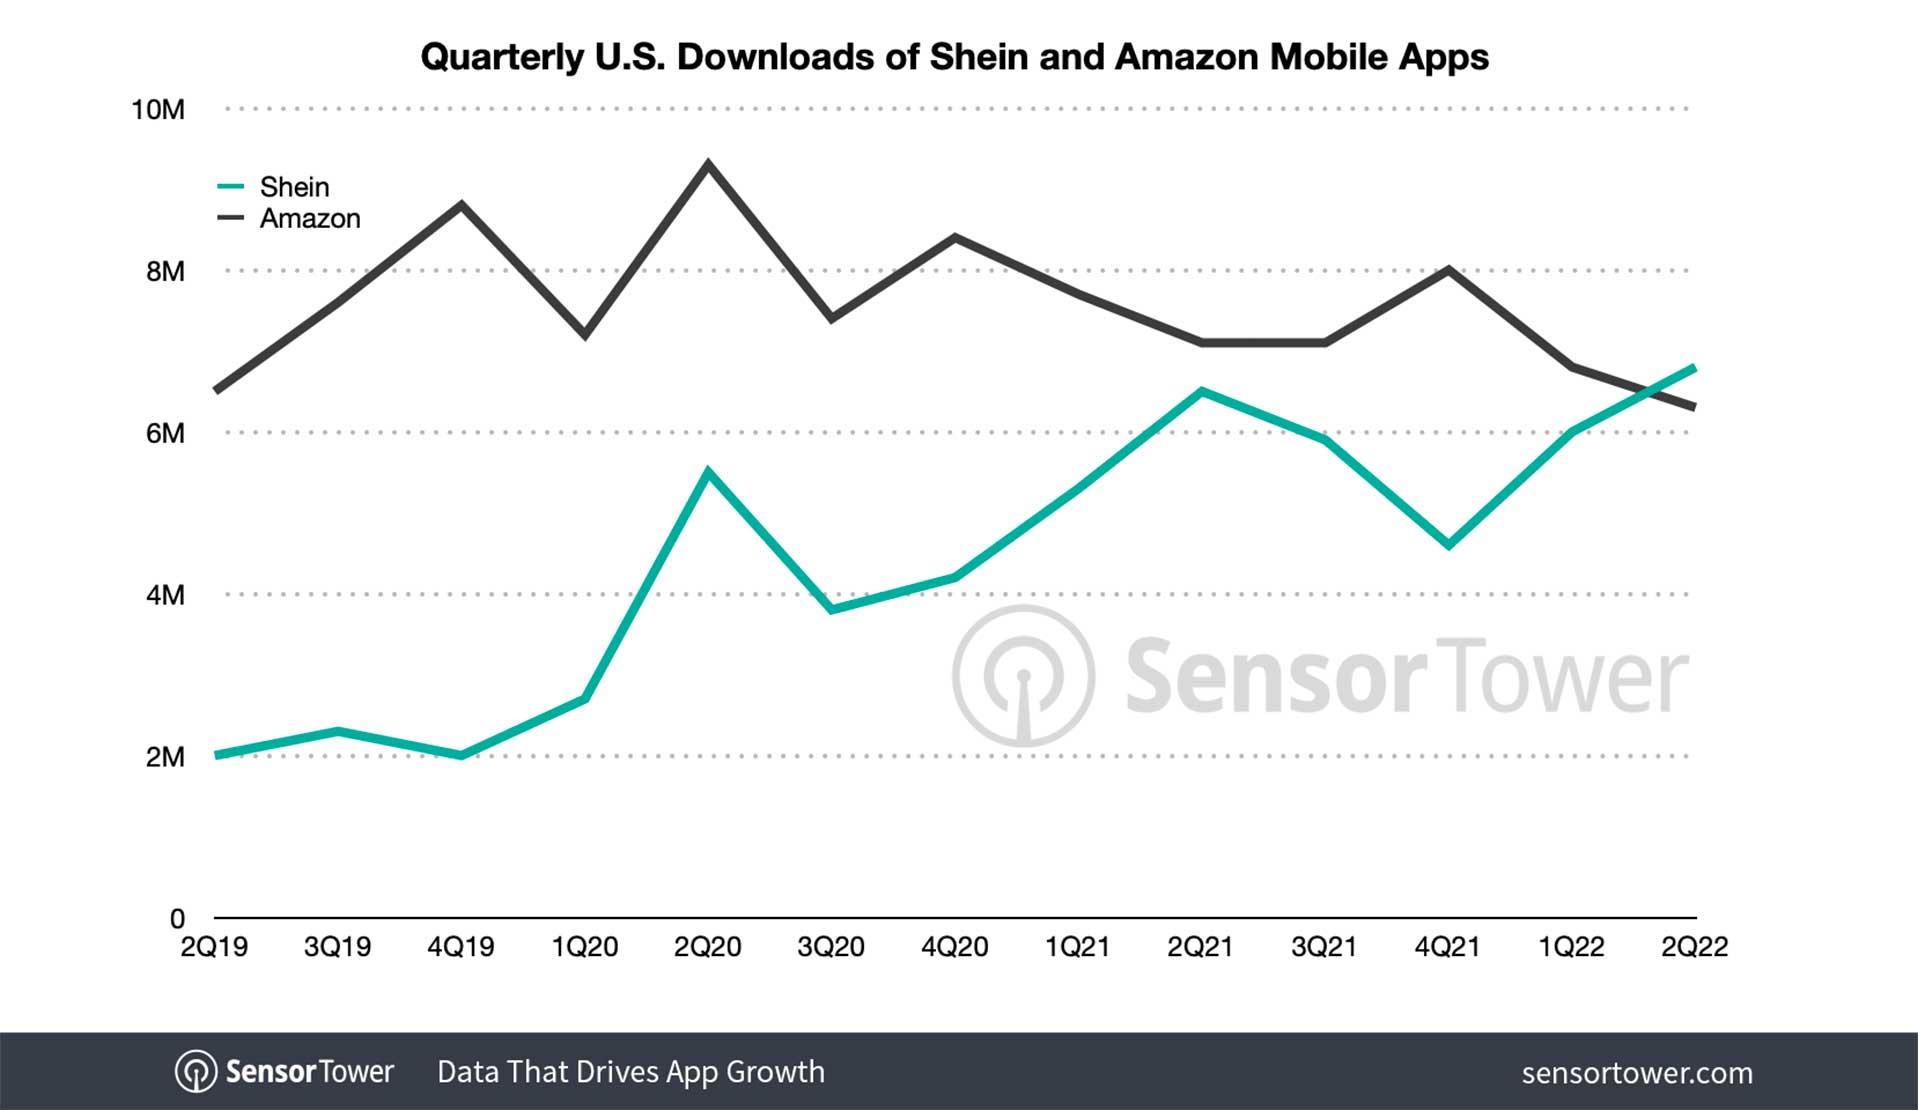 SHEIN: 7 Months At the Top of Global Shopping App Rankings - Pandaily